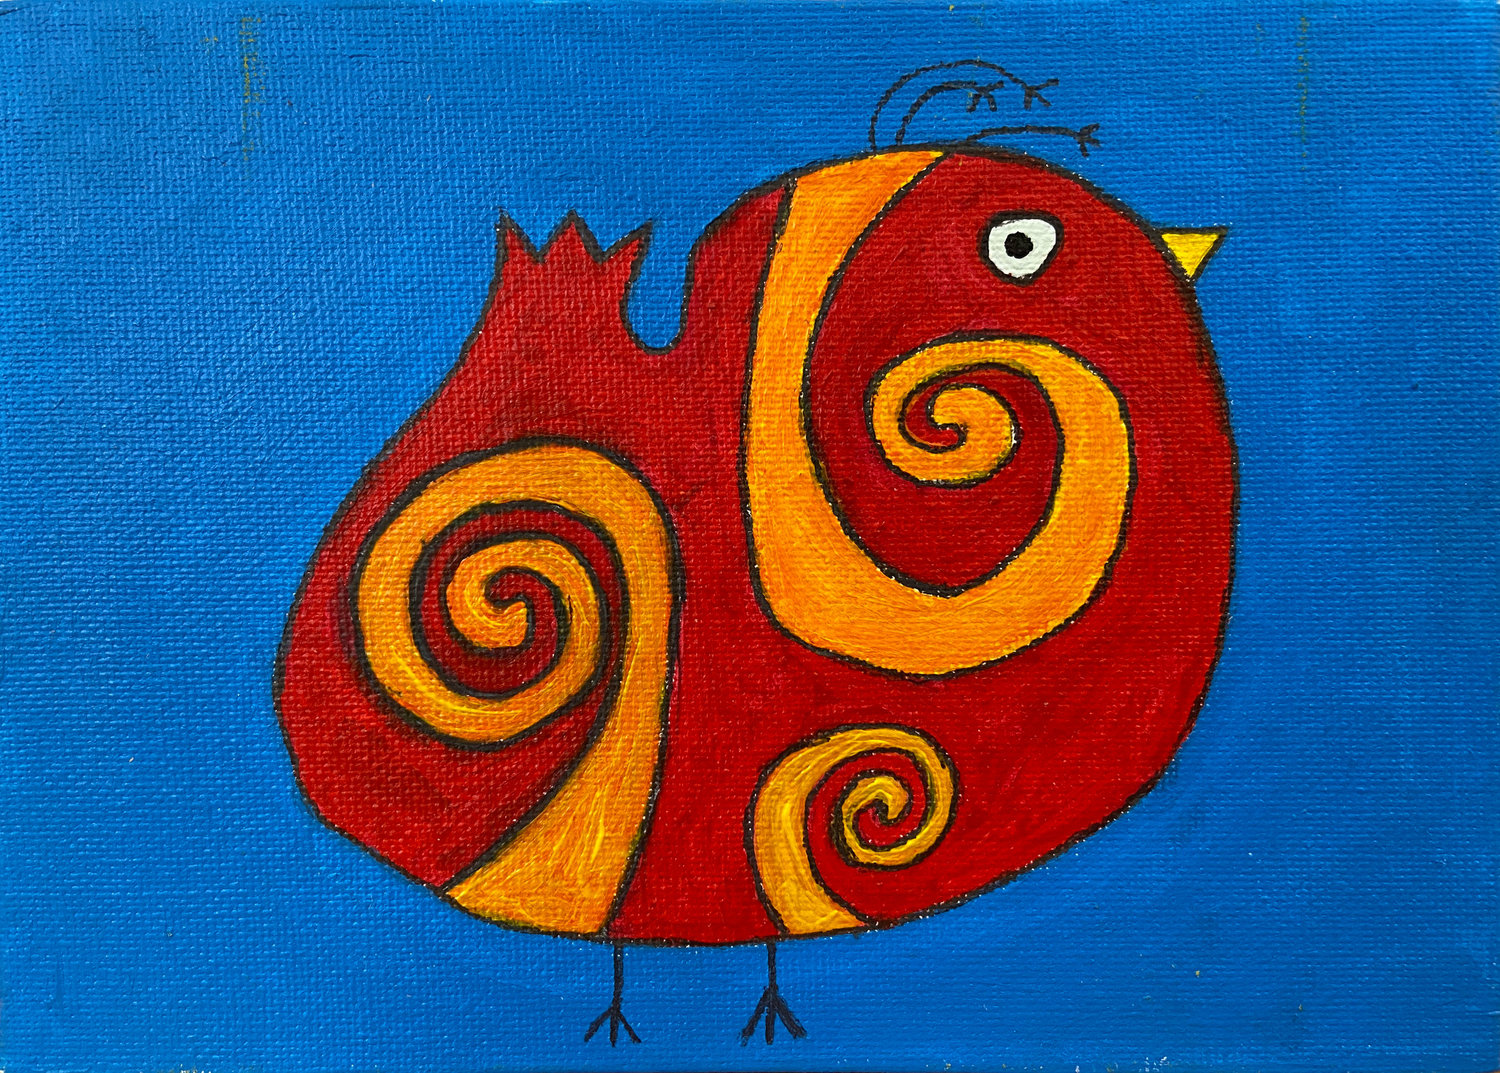 “Red Swirly Quail on Blue,” by Mary Prentice